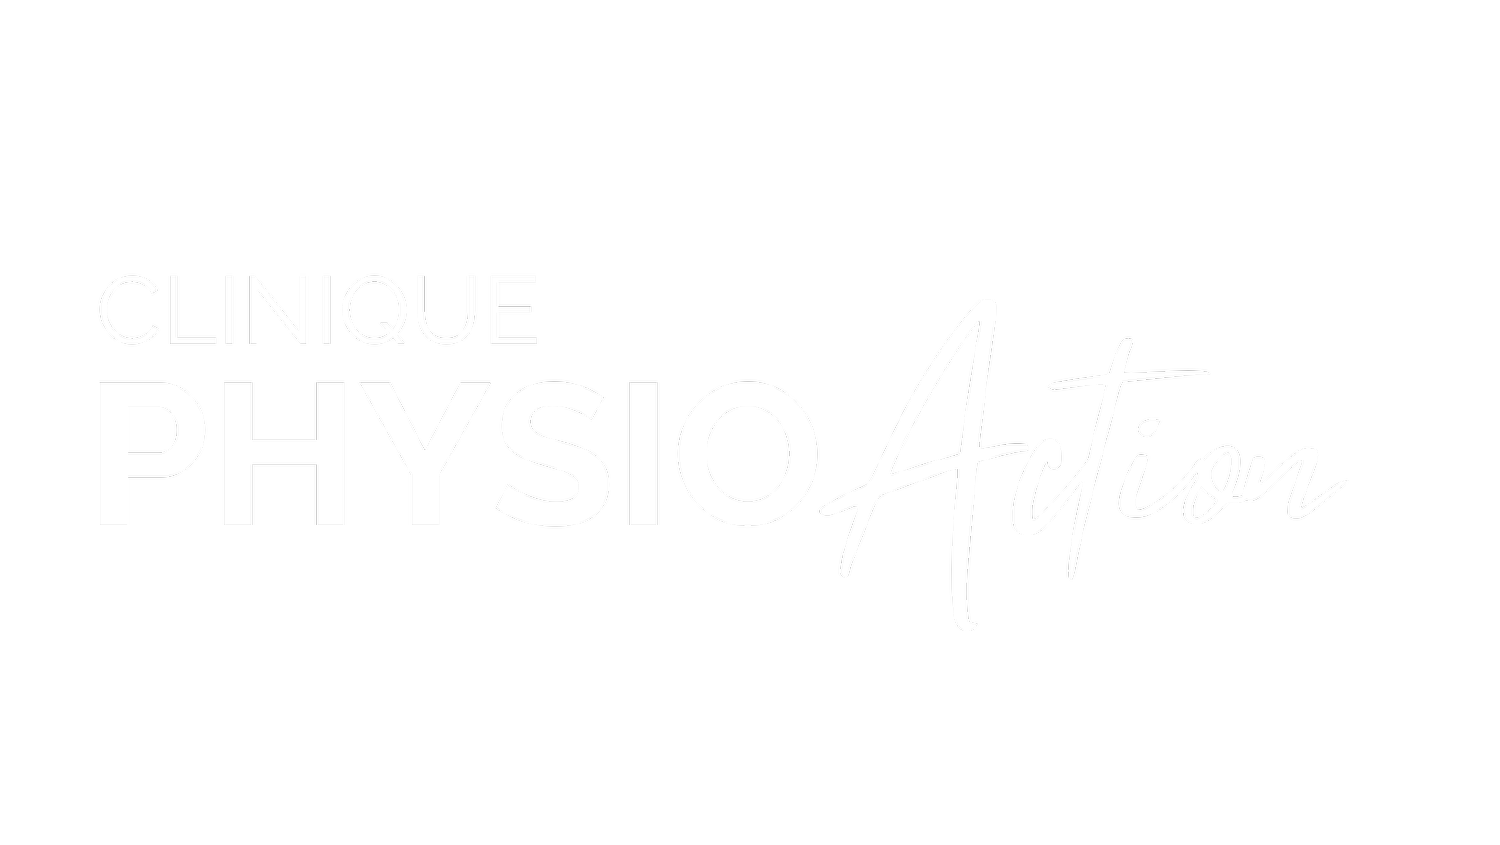 Clinique Physio Action